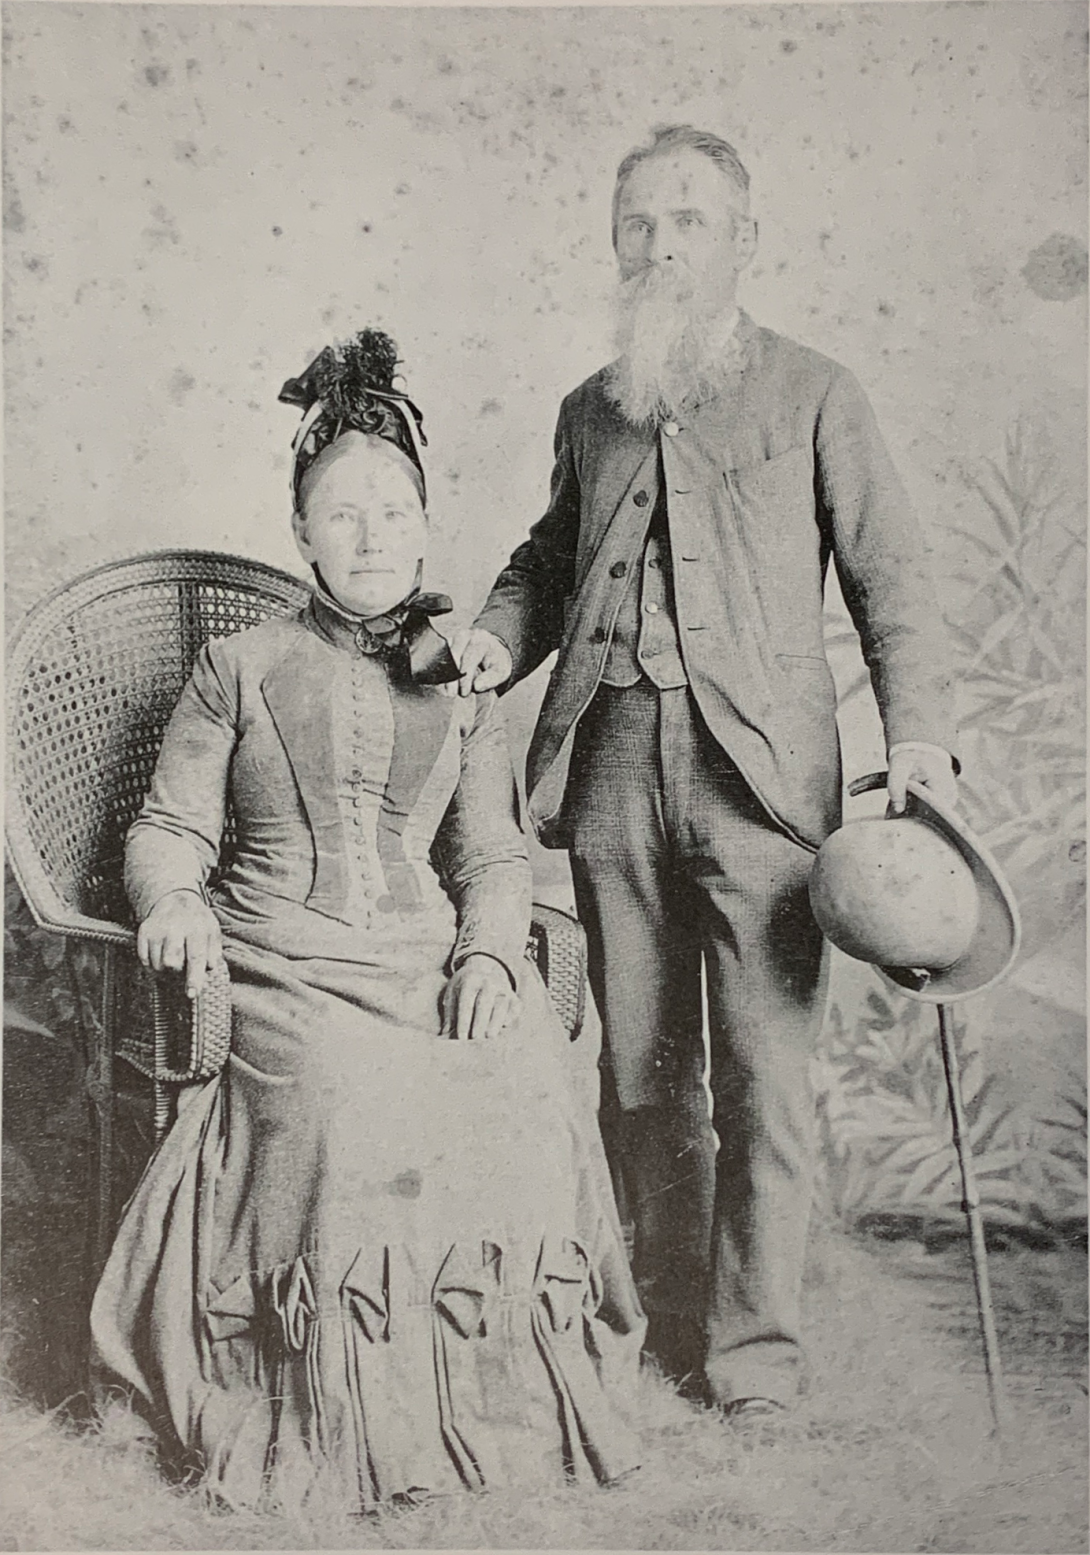 A black-and-white studio photo from the 1800s of a woman in period dress seated in a cane chair, with a man in a three-piece suit and carrying his bowler hat and cane standing beside her.